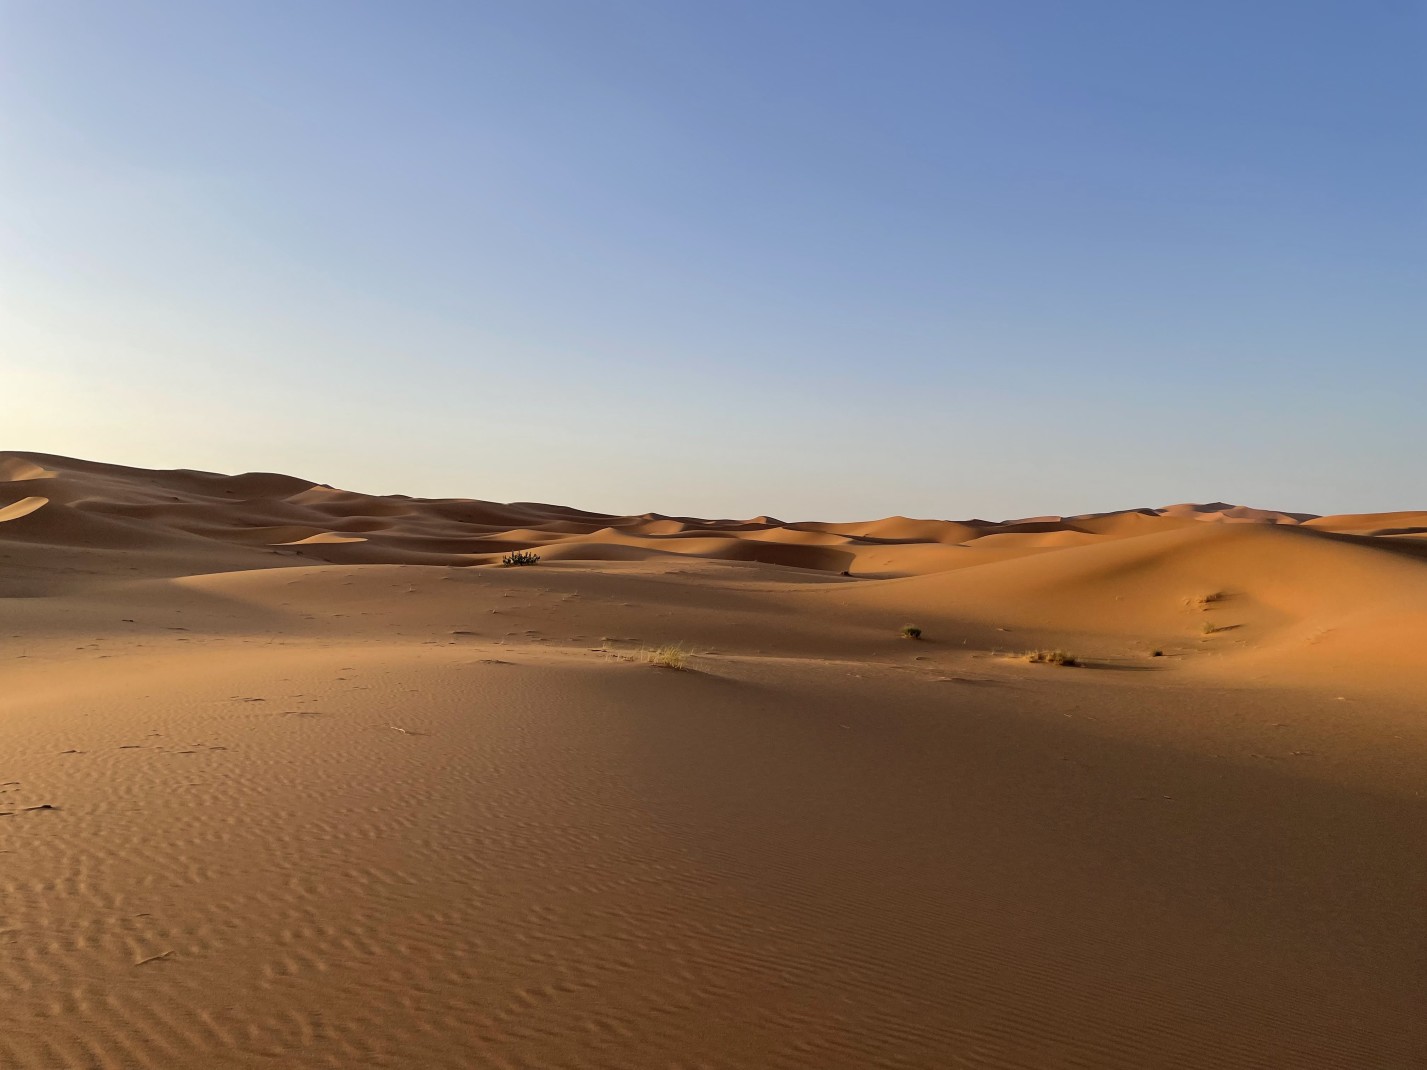 Expansive desert with blue skies during daytime